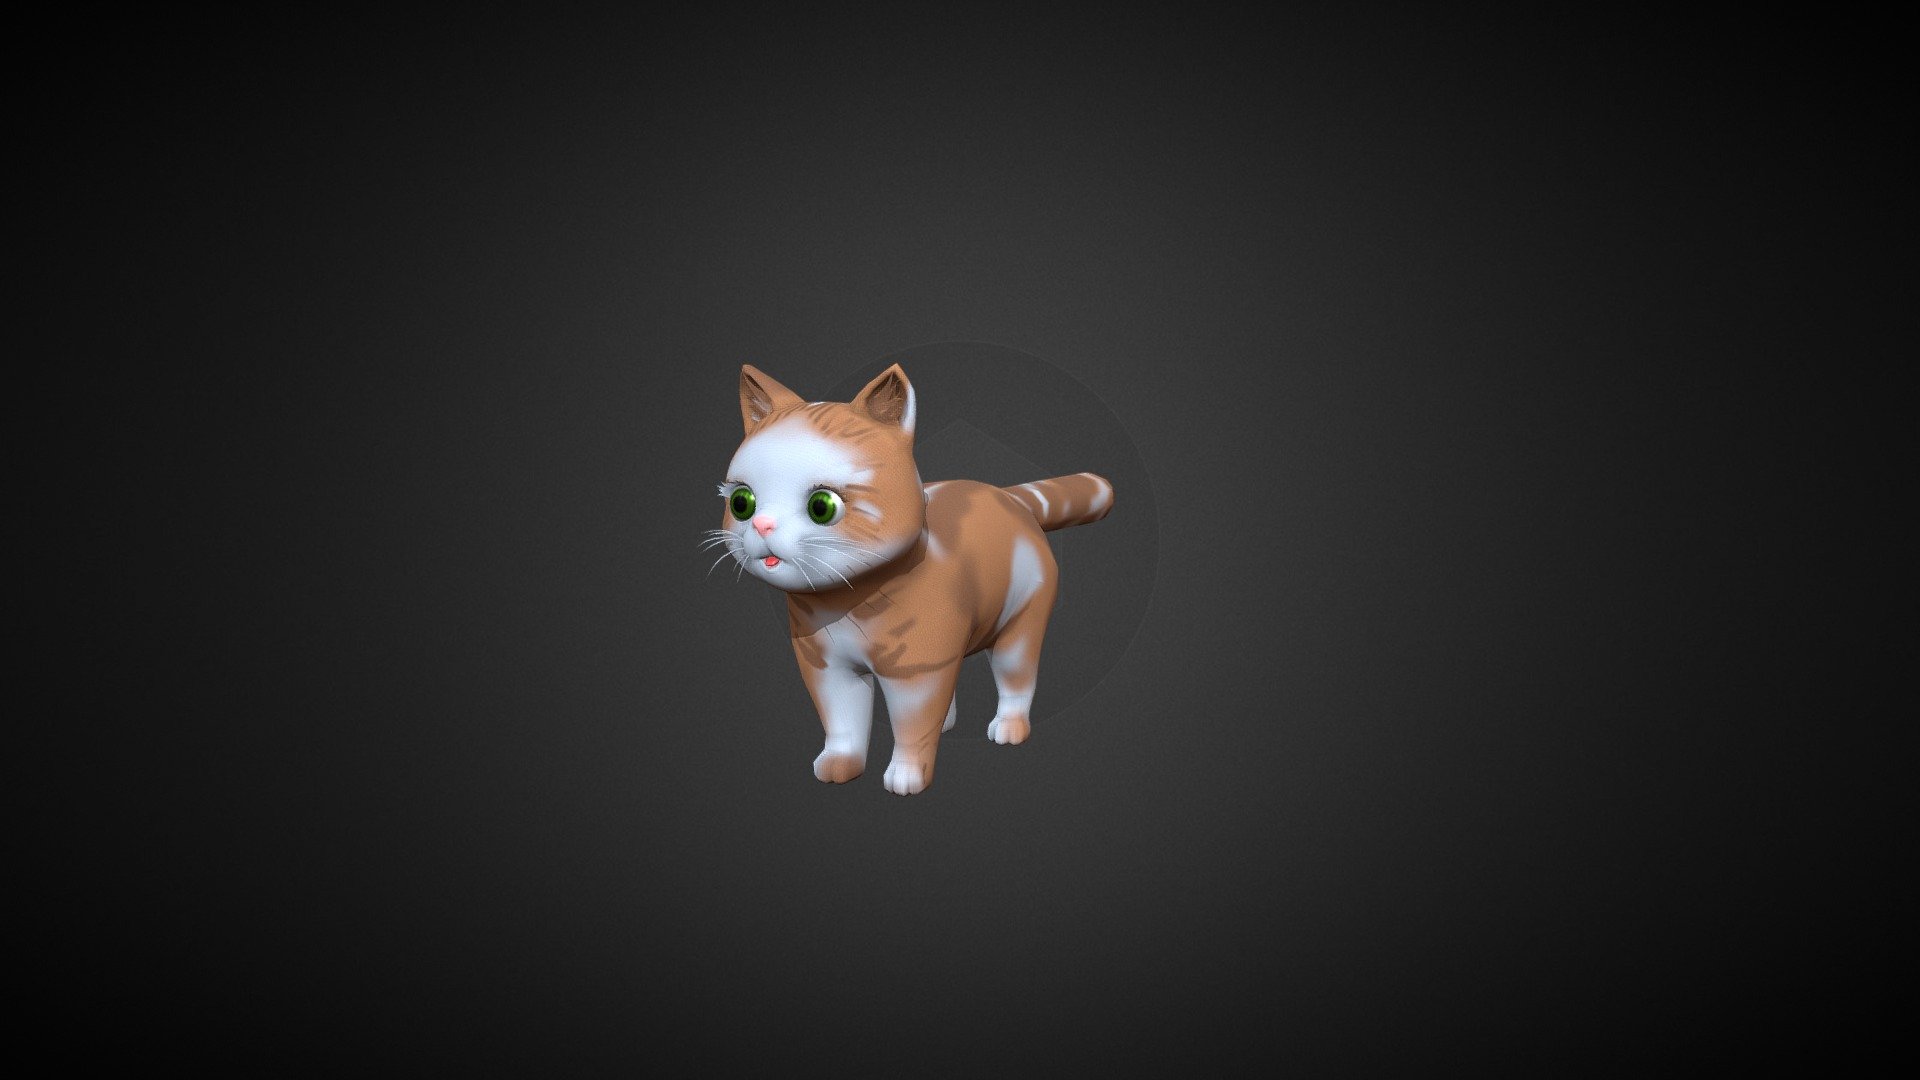 cartoon 3d cat model made in blender and manually textured in substance painter 3d model